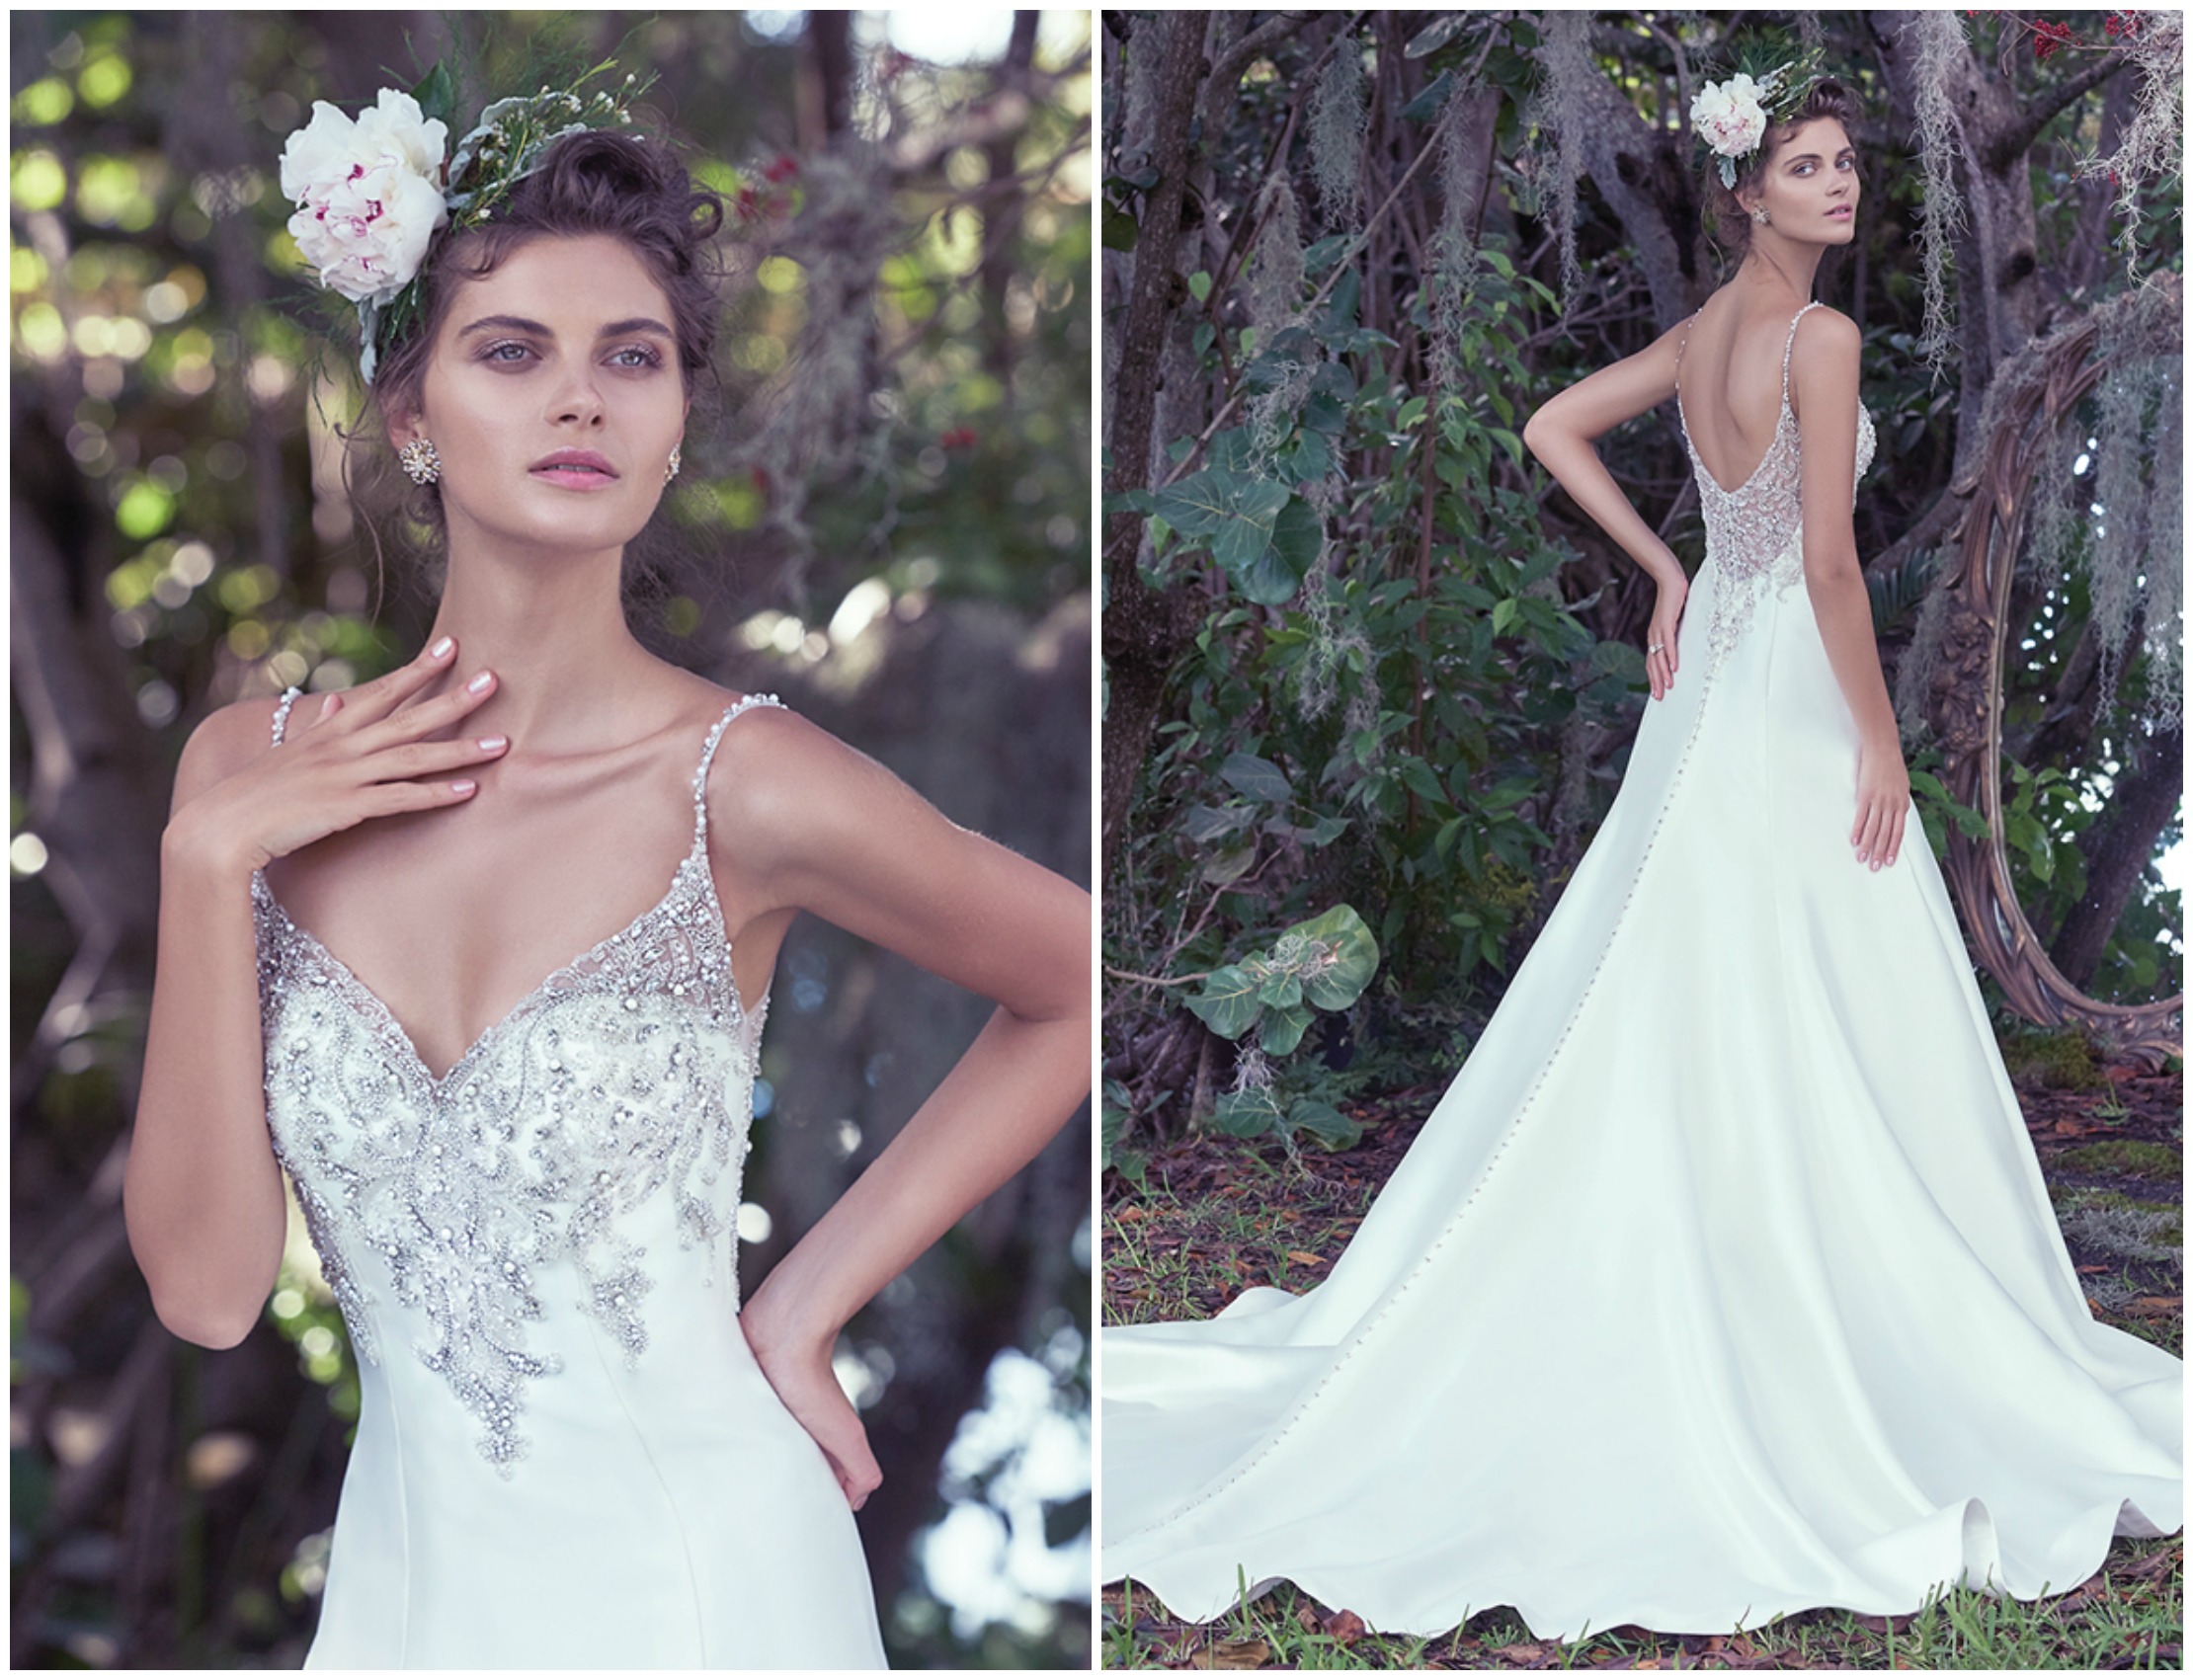 Refined elegance is found in this embellished Elodie mikado A-Line wedding dress with a deep V-neckline. Glimmering Swarovski crystals generously adorn the fitted bodice, beaded spaghetti straps, and dramatic illusion back. Finished with crystal buttons over zipper closure.

<a href="https://www.maggiesottero.com/maggie-sottero/kimberly/9686" target="_blank">Maggie Sottero</a>